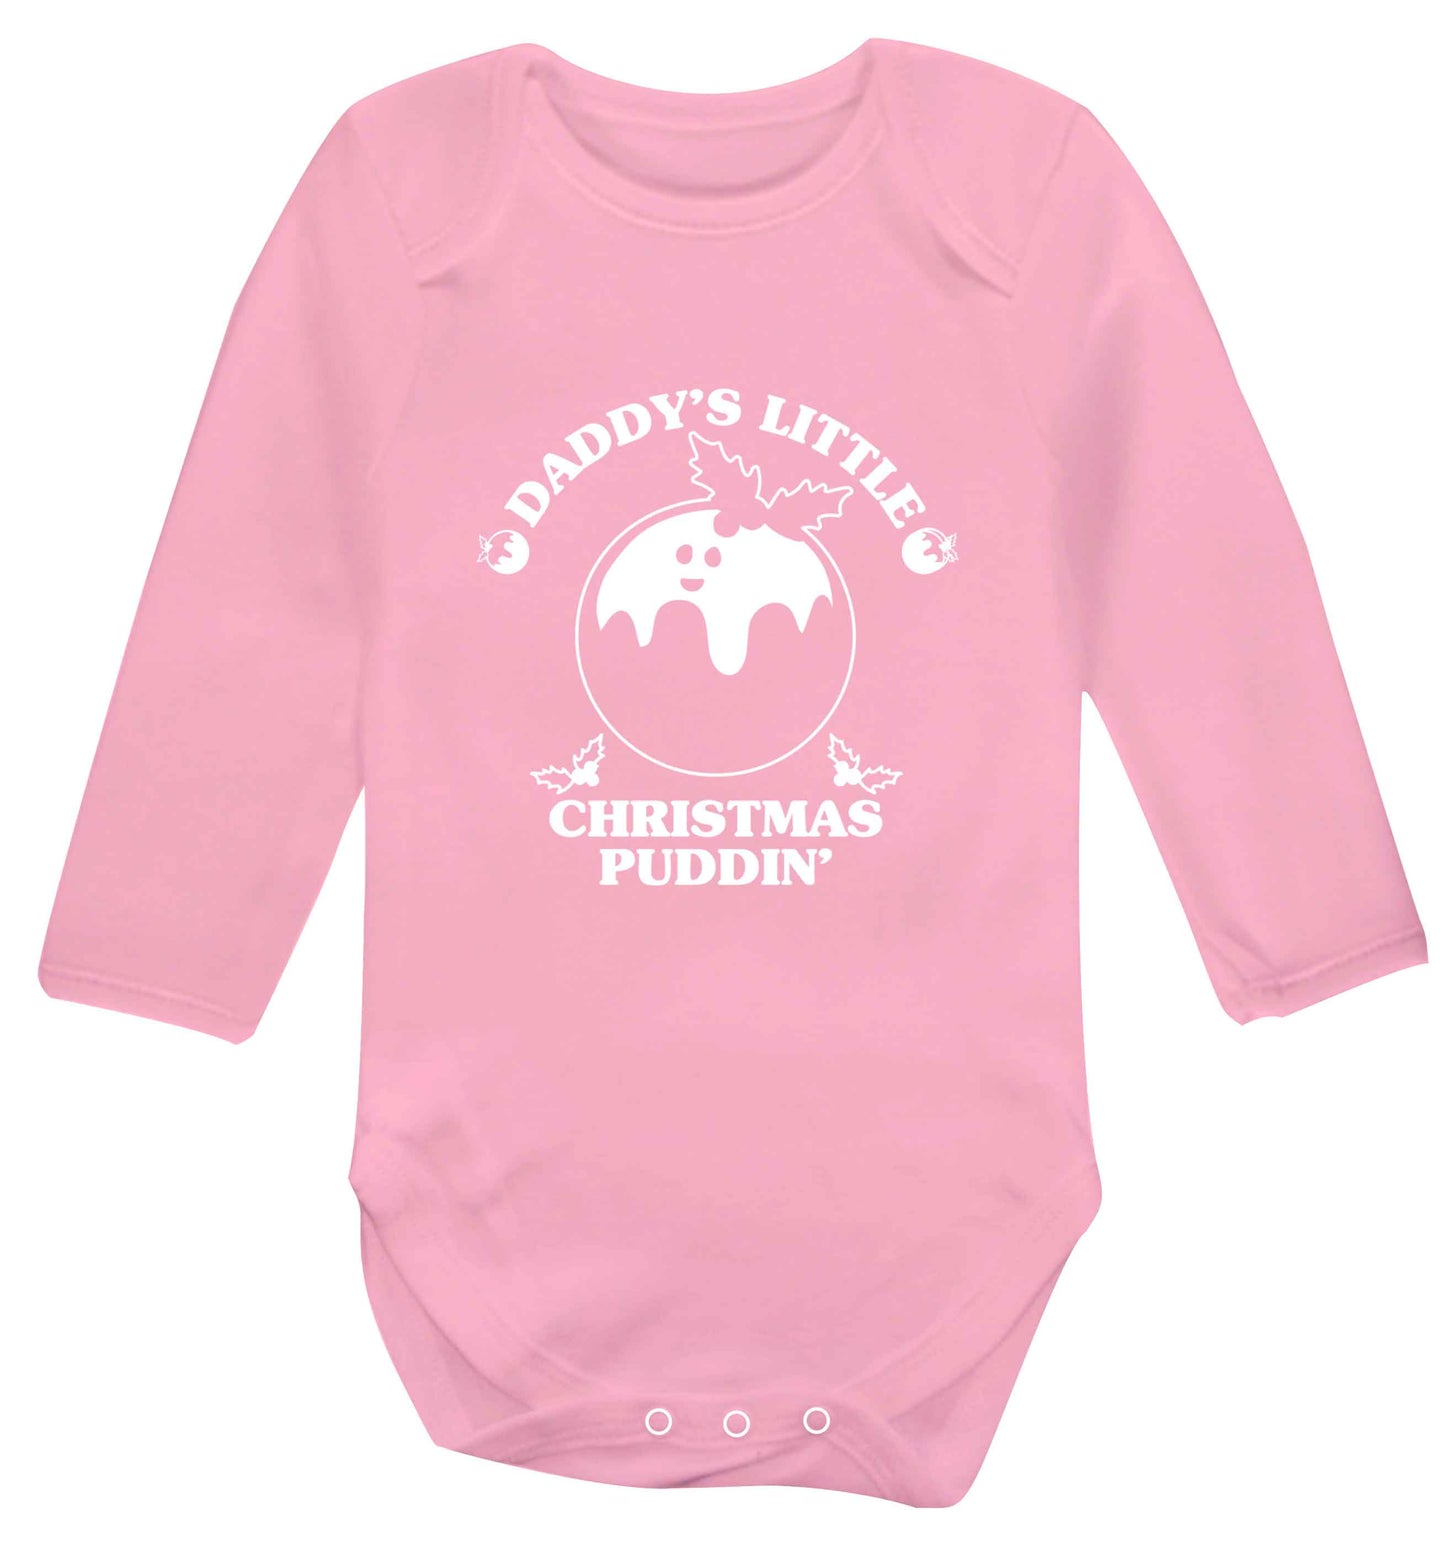 Daddy's little Christmas puddin' Baby Vest long sleeved pale pink 6-12 months